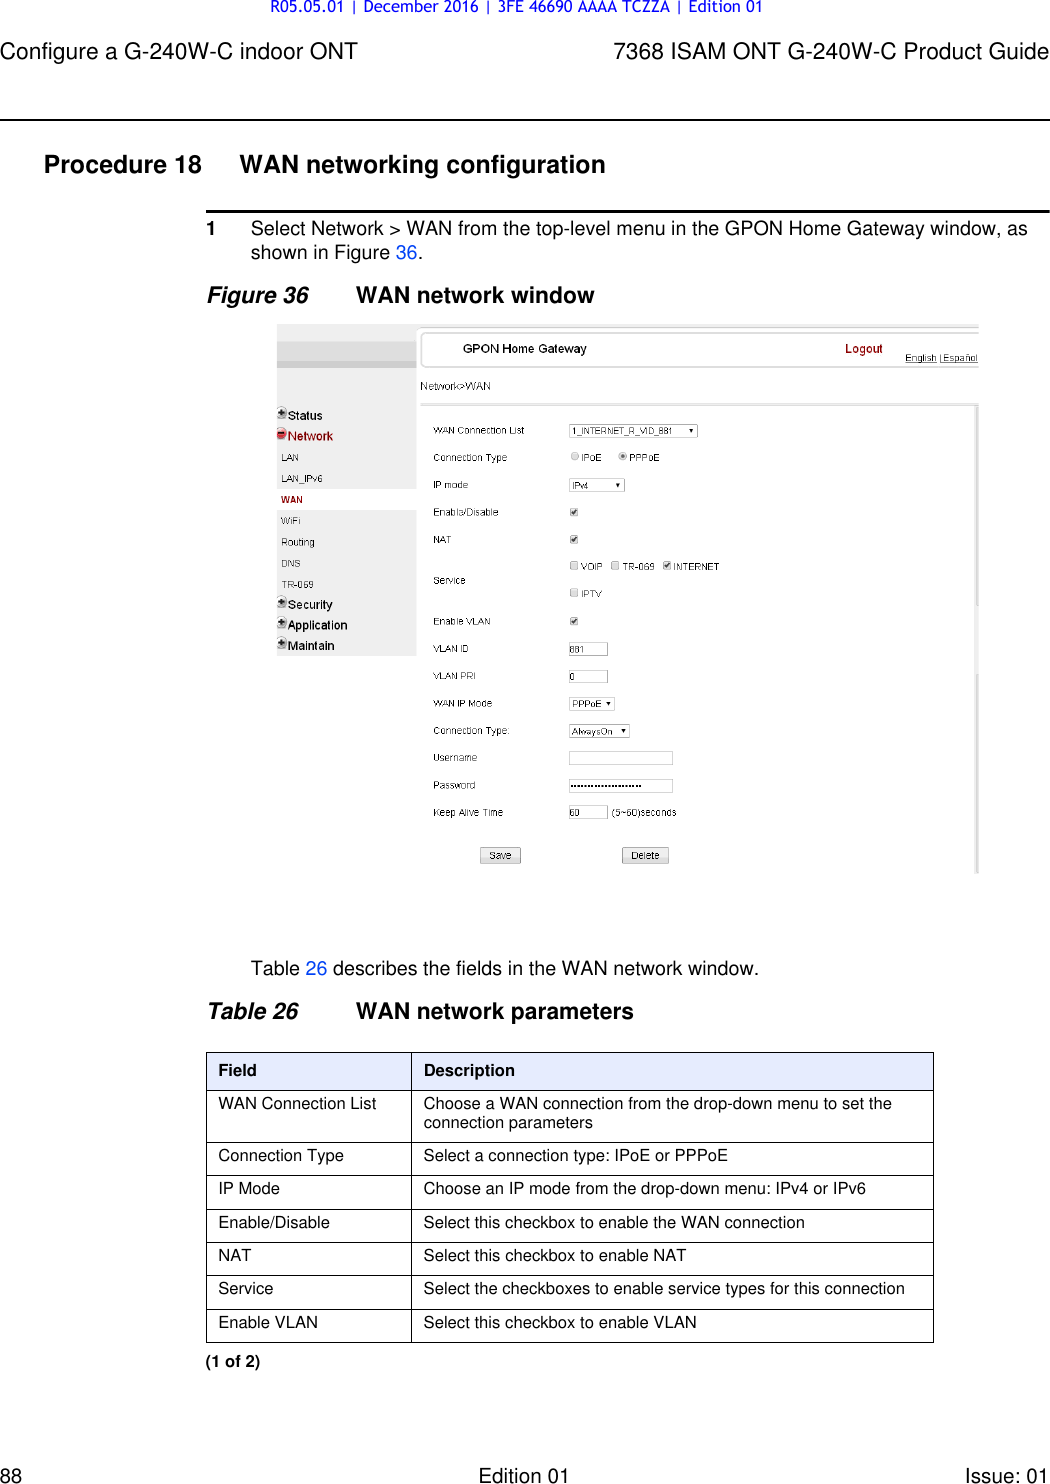 Page 88 of Nokia Bell G240W-C GPON ONU User Manual 7368 ISAM ONT G 240W B Product Guide